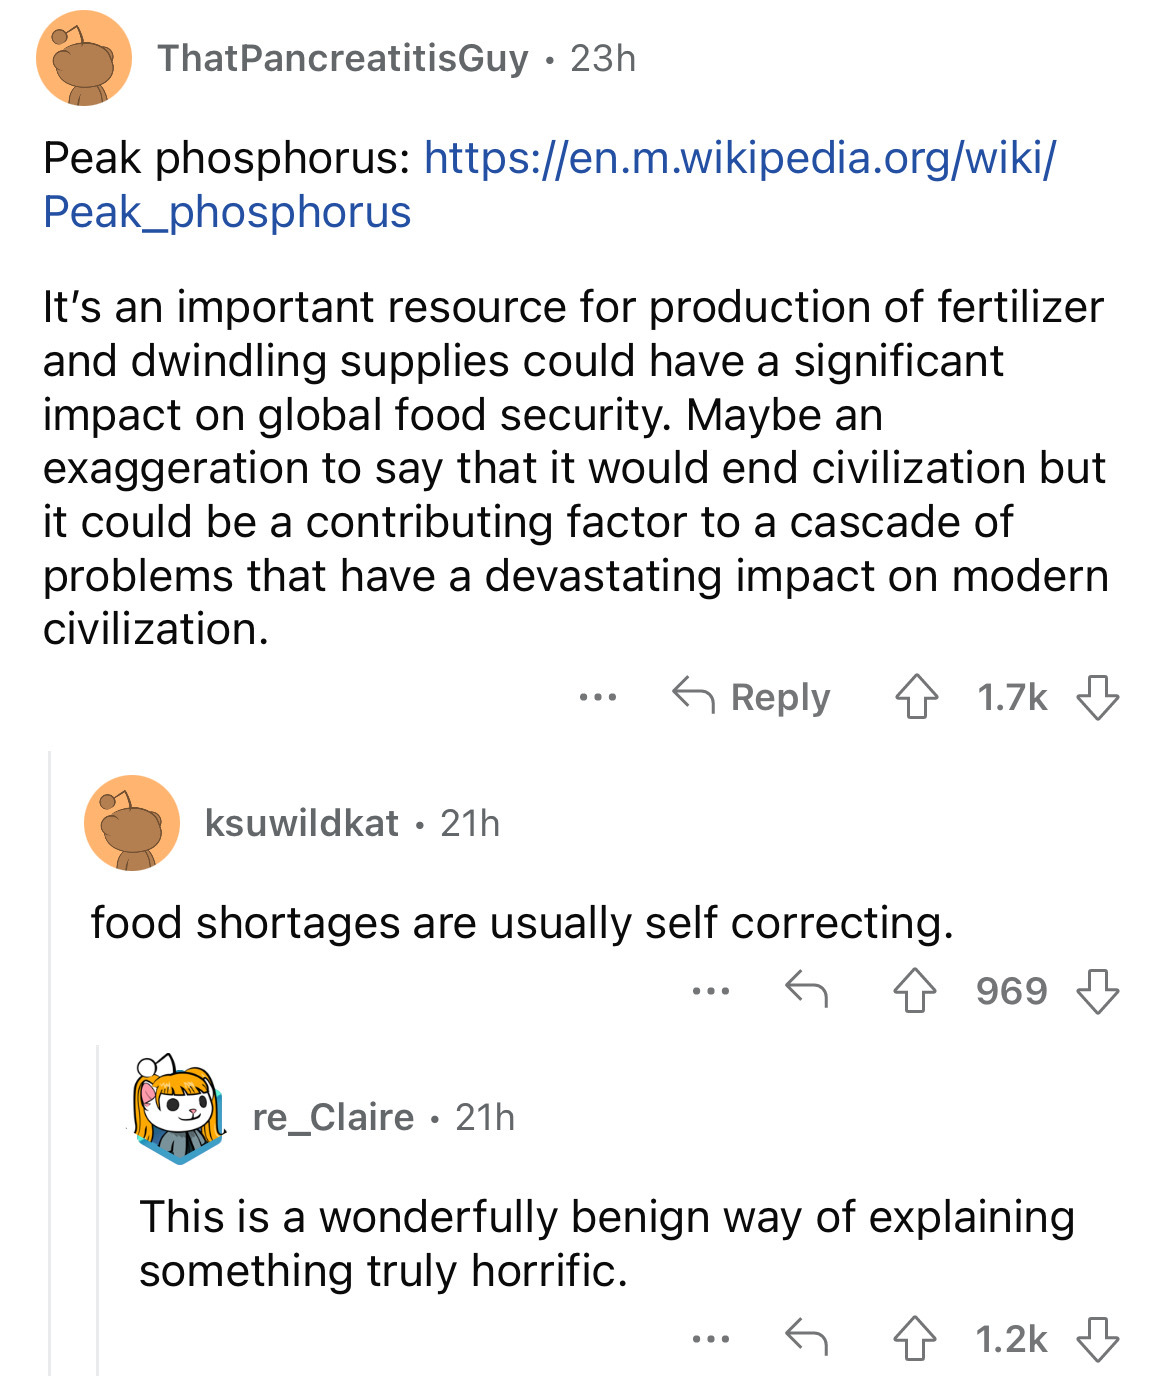 screenshot - ThatPancreatitisGuy 23h . Peak phosphorus Peak_phosphorus It's an important resource for production of fertilizer and dwindling supplies could have a significant impact on global food security. Maybe an exaggeration to say that it would end c